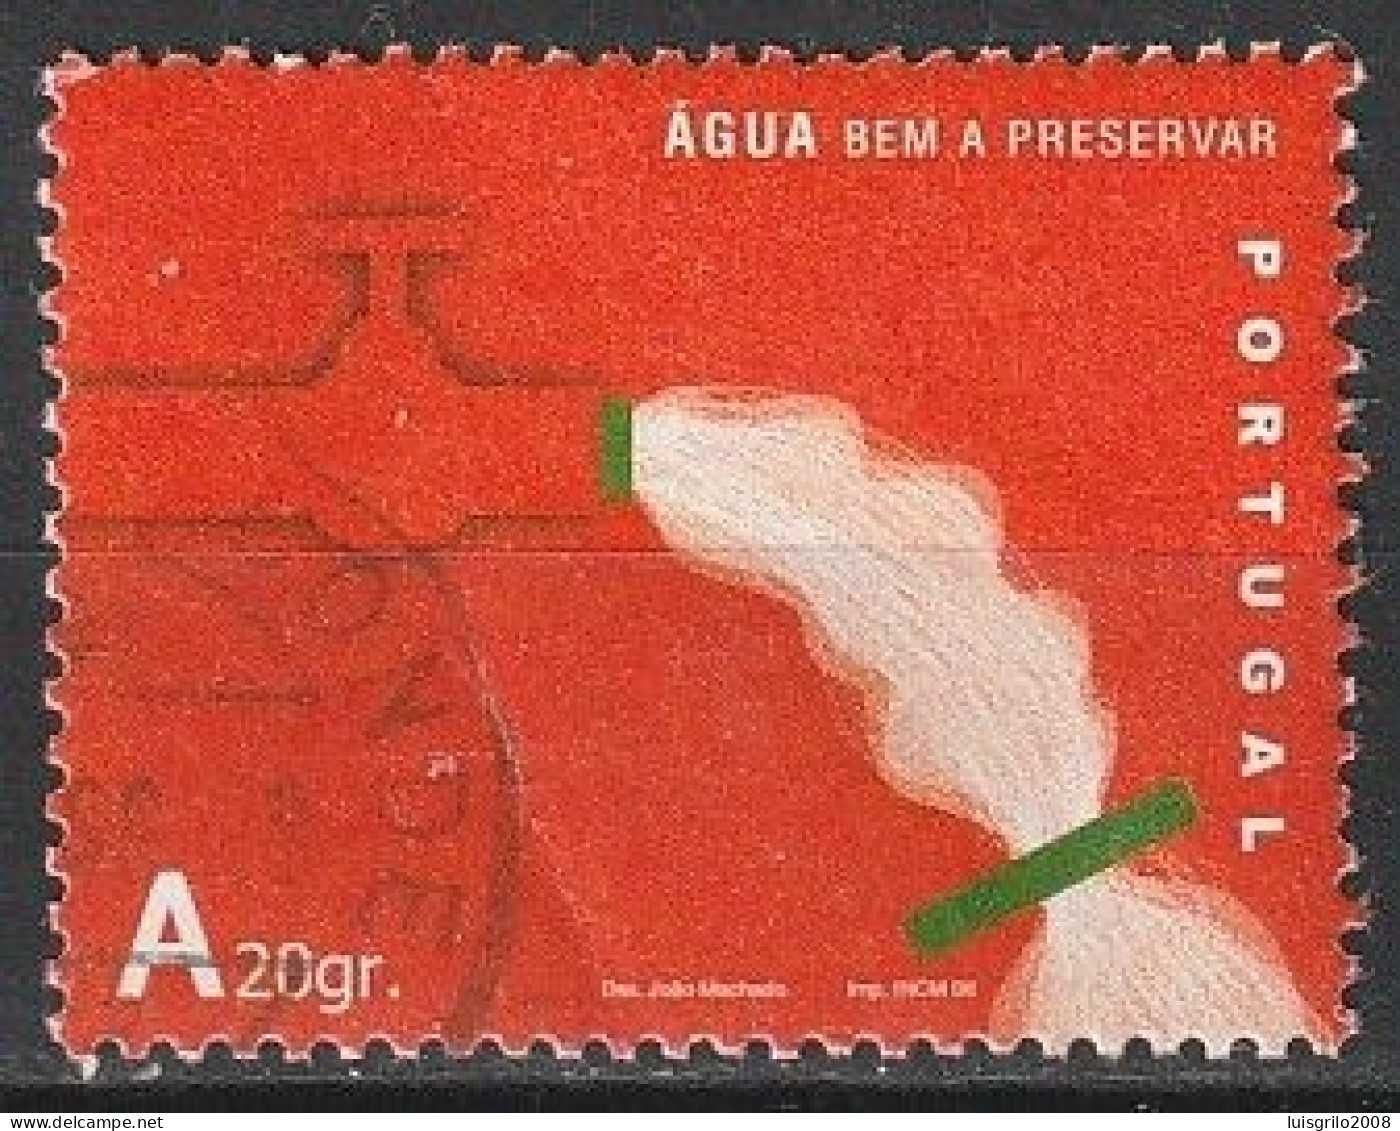 Portugal, 2006 - Água, A20gr -|- Mundifil - 3387 - Used Stamps